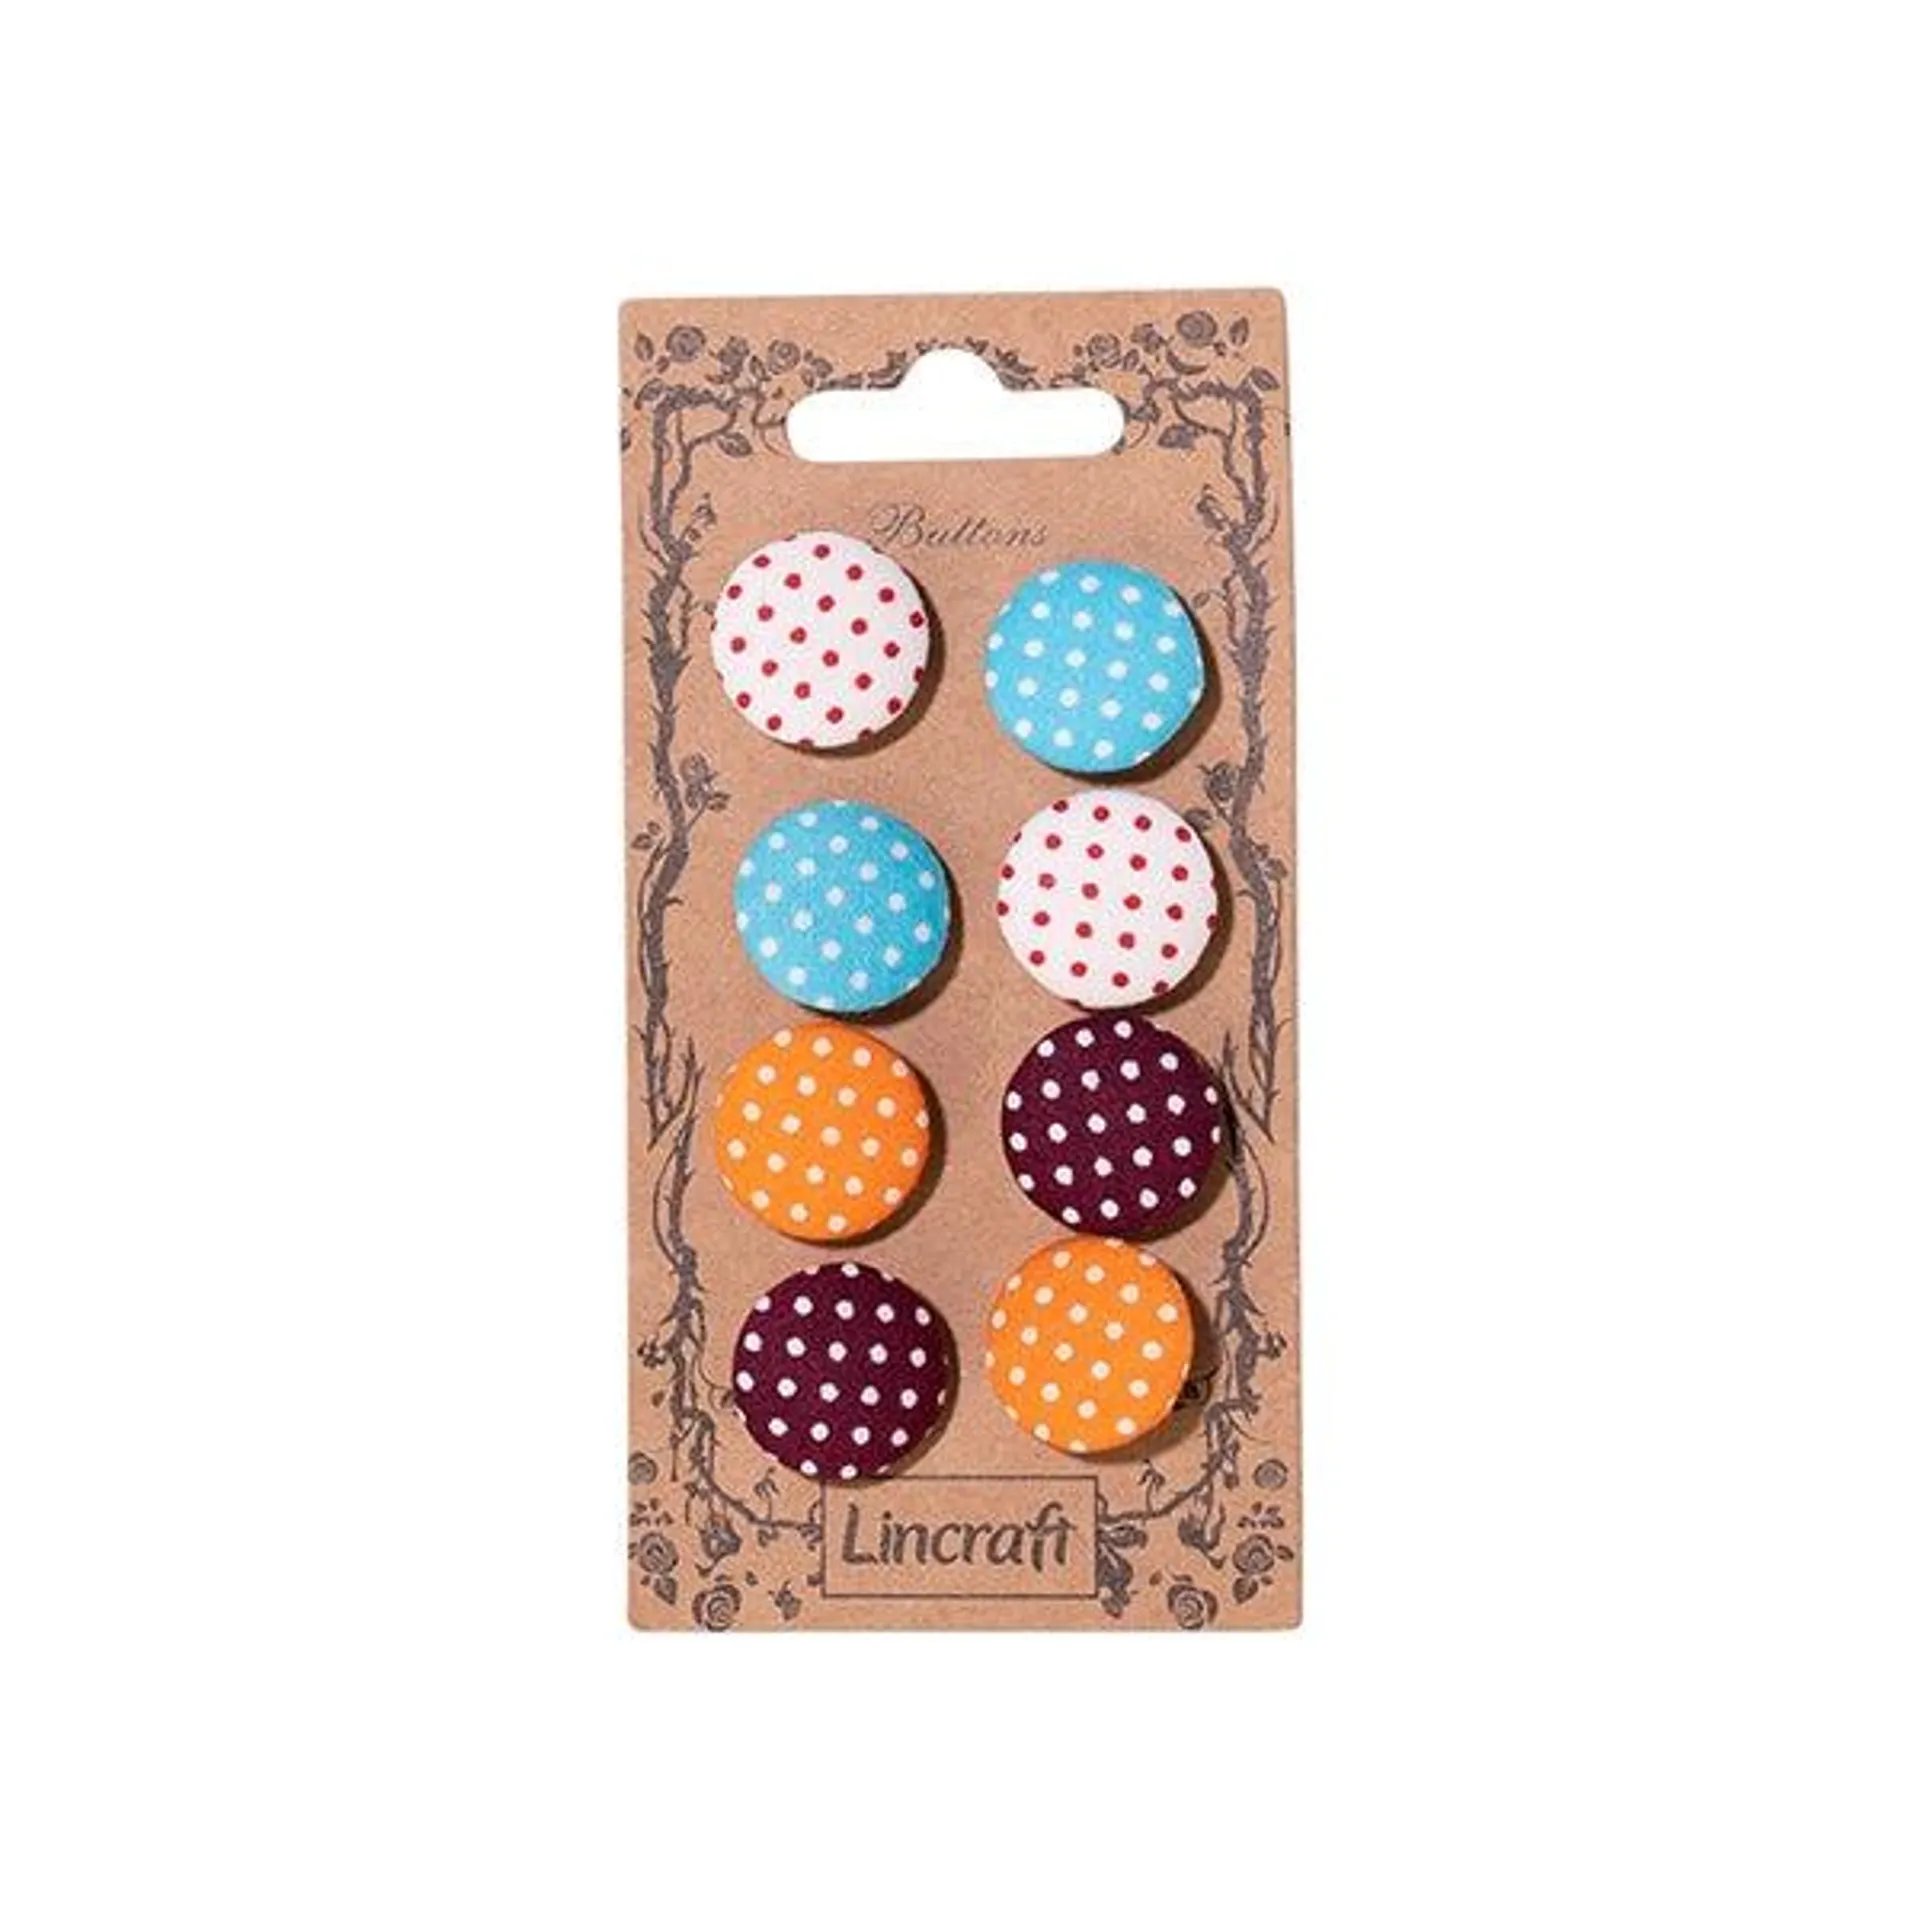 Carded Buttons, Fabric Dome- 8pk